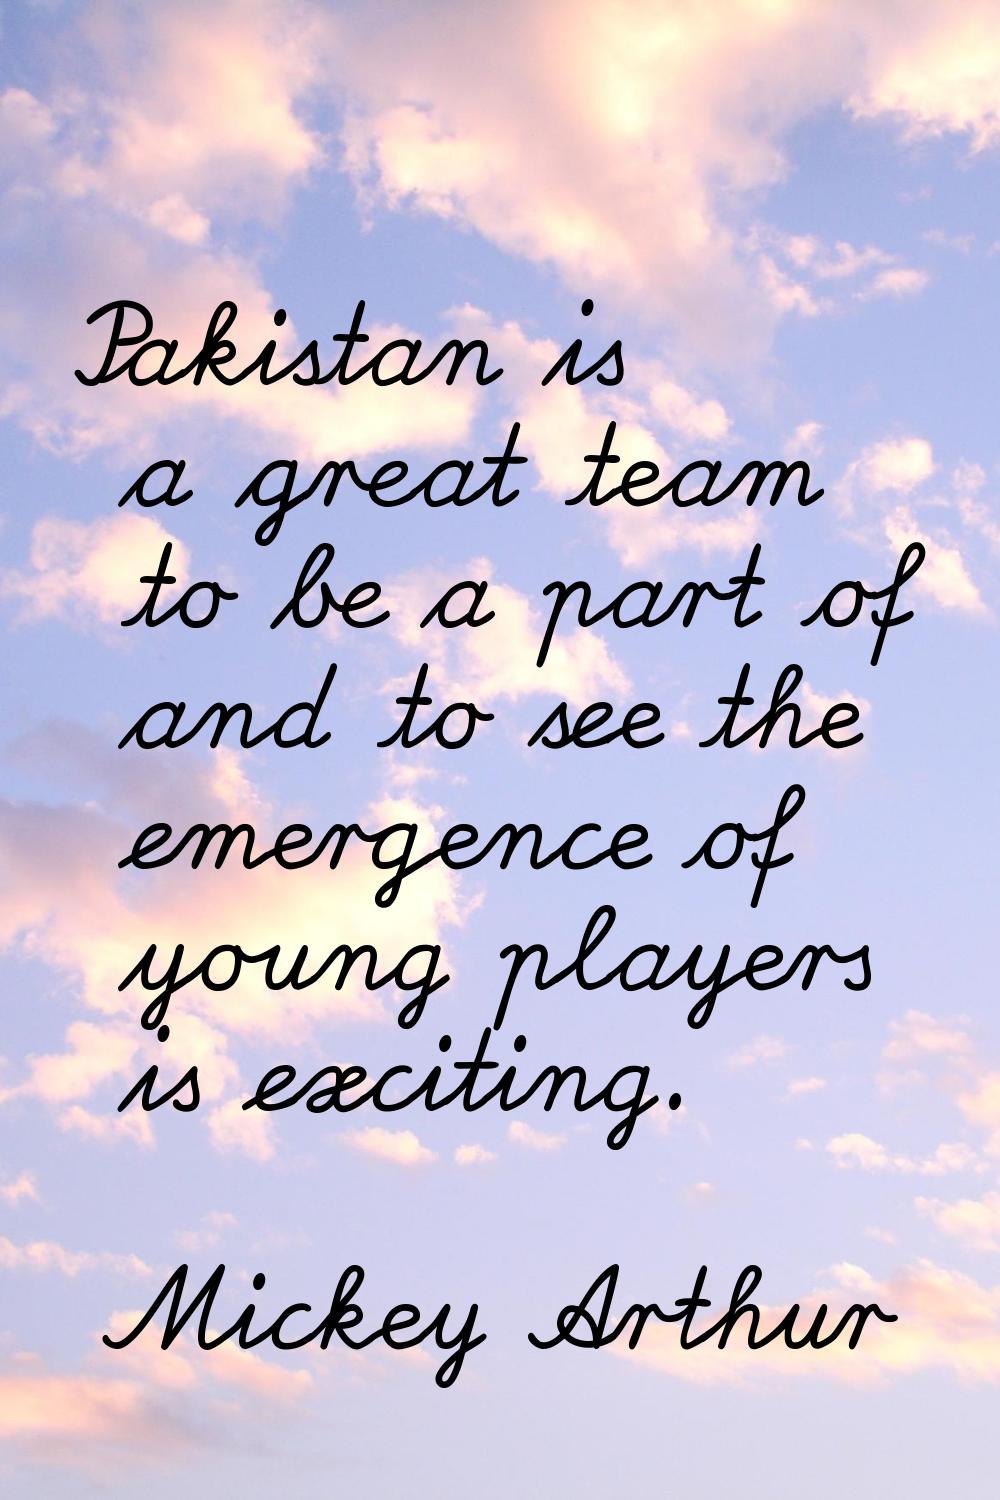 Pakistan is a great team to be a part of and to see the emergence of young players is exciting.